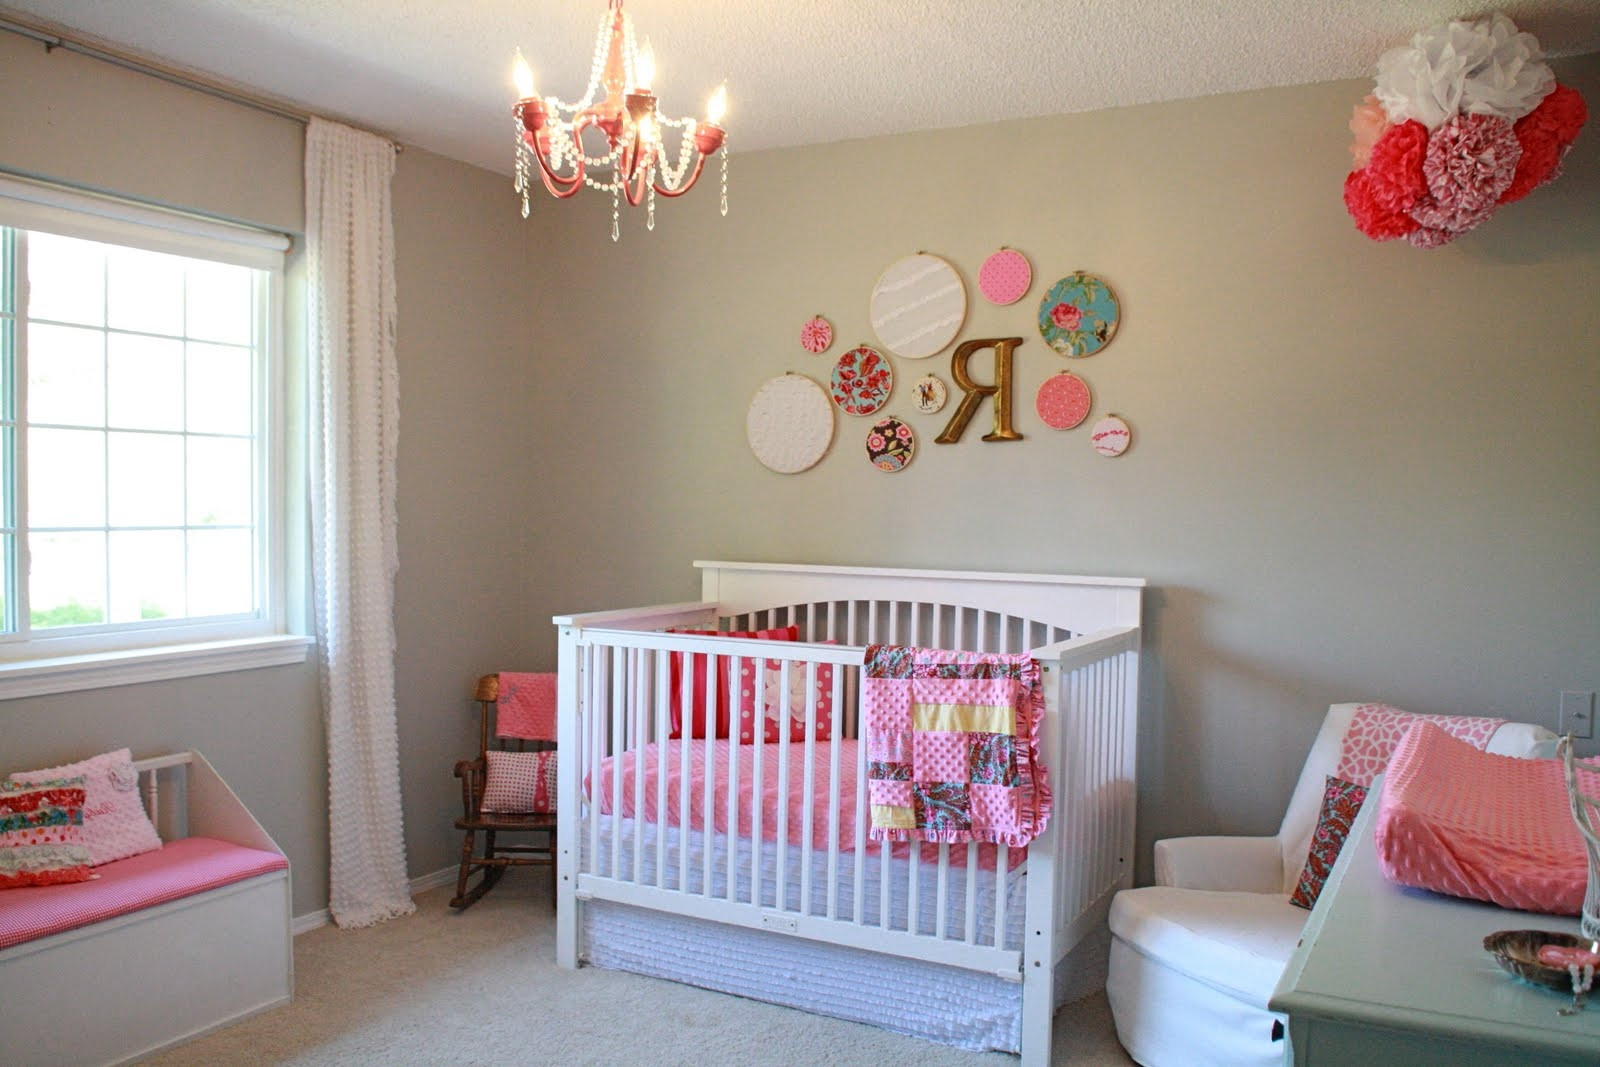 How To Decorate Baby Room
 Baby Girl Room Decor Ideas